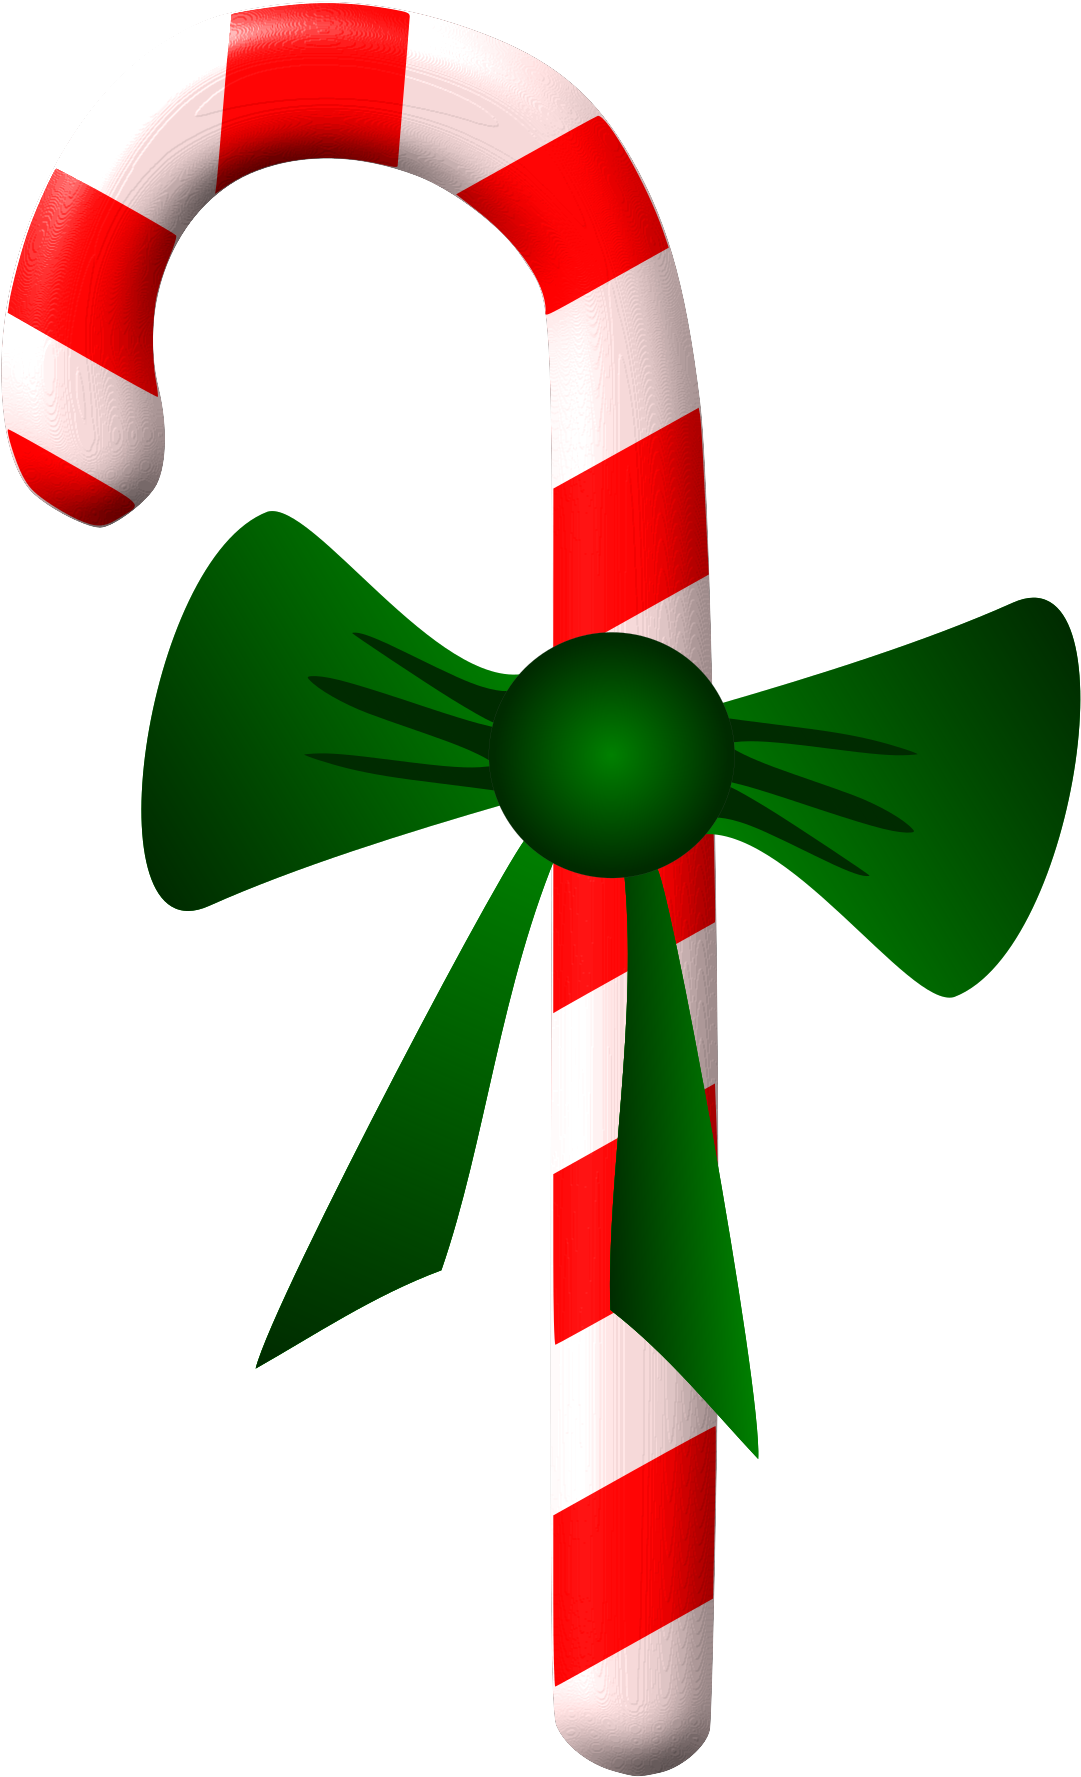 Big Image - Candy Cane Picture Small (2859x2400)